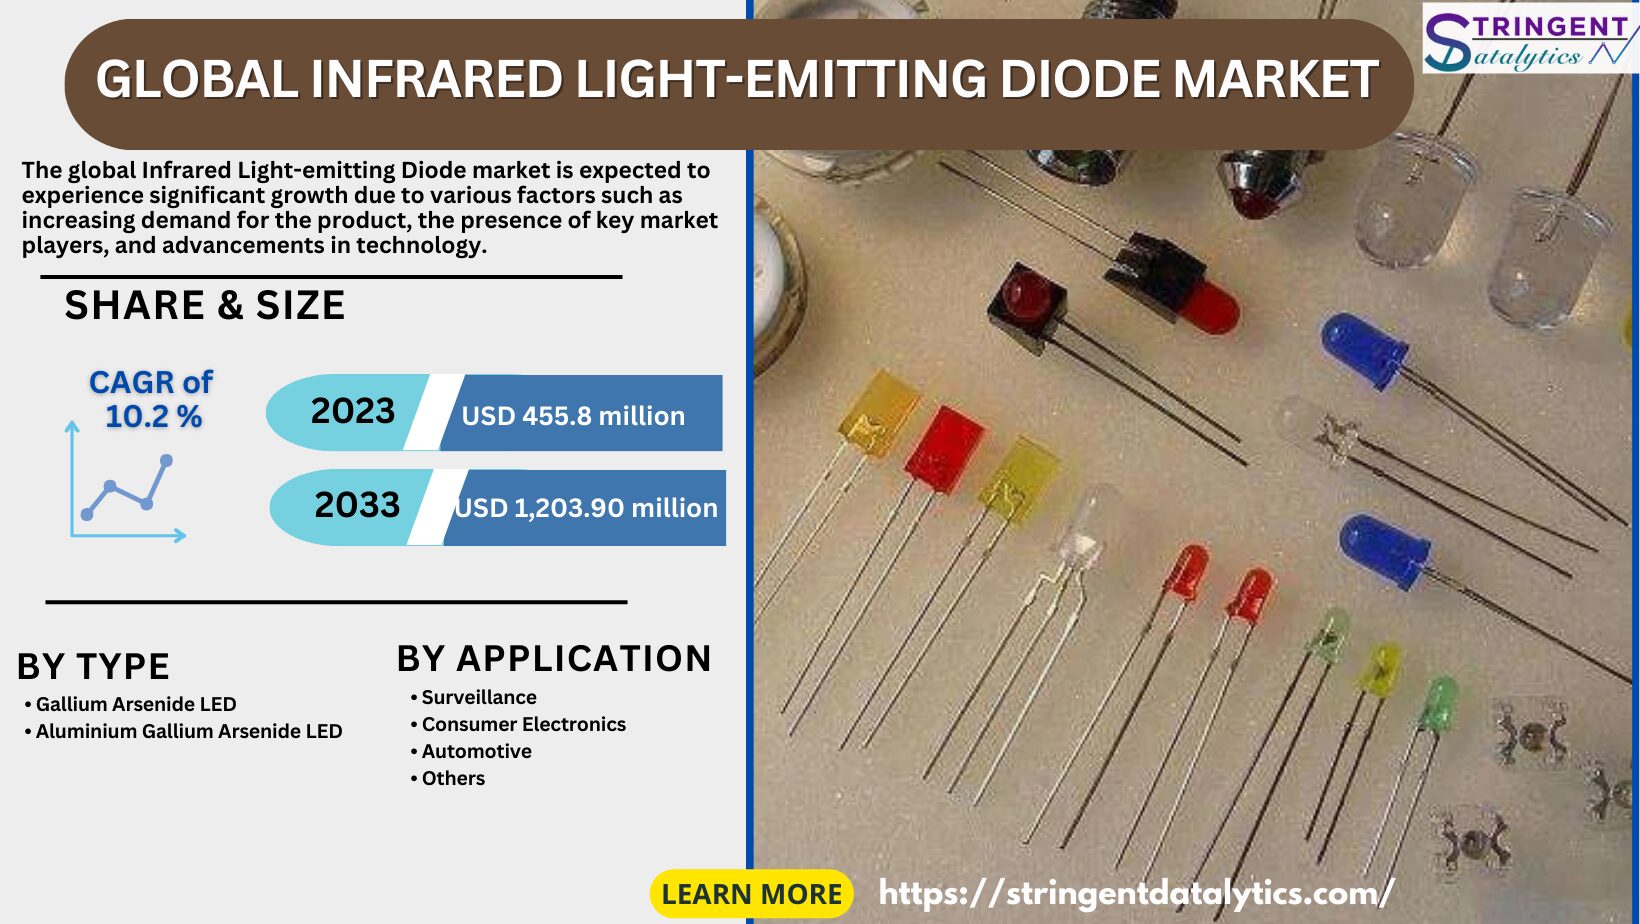 Illuminating the Unseen: A Comprehensive Analysis of the Global Infrared Light-emitting Diode (IR LED) Market – Trends, Applications, and Growth Strategies